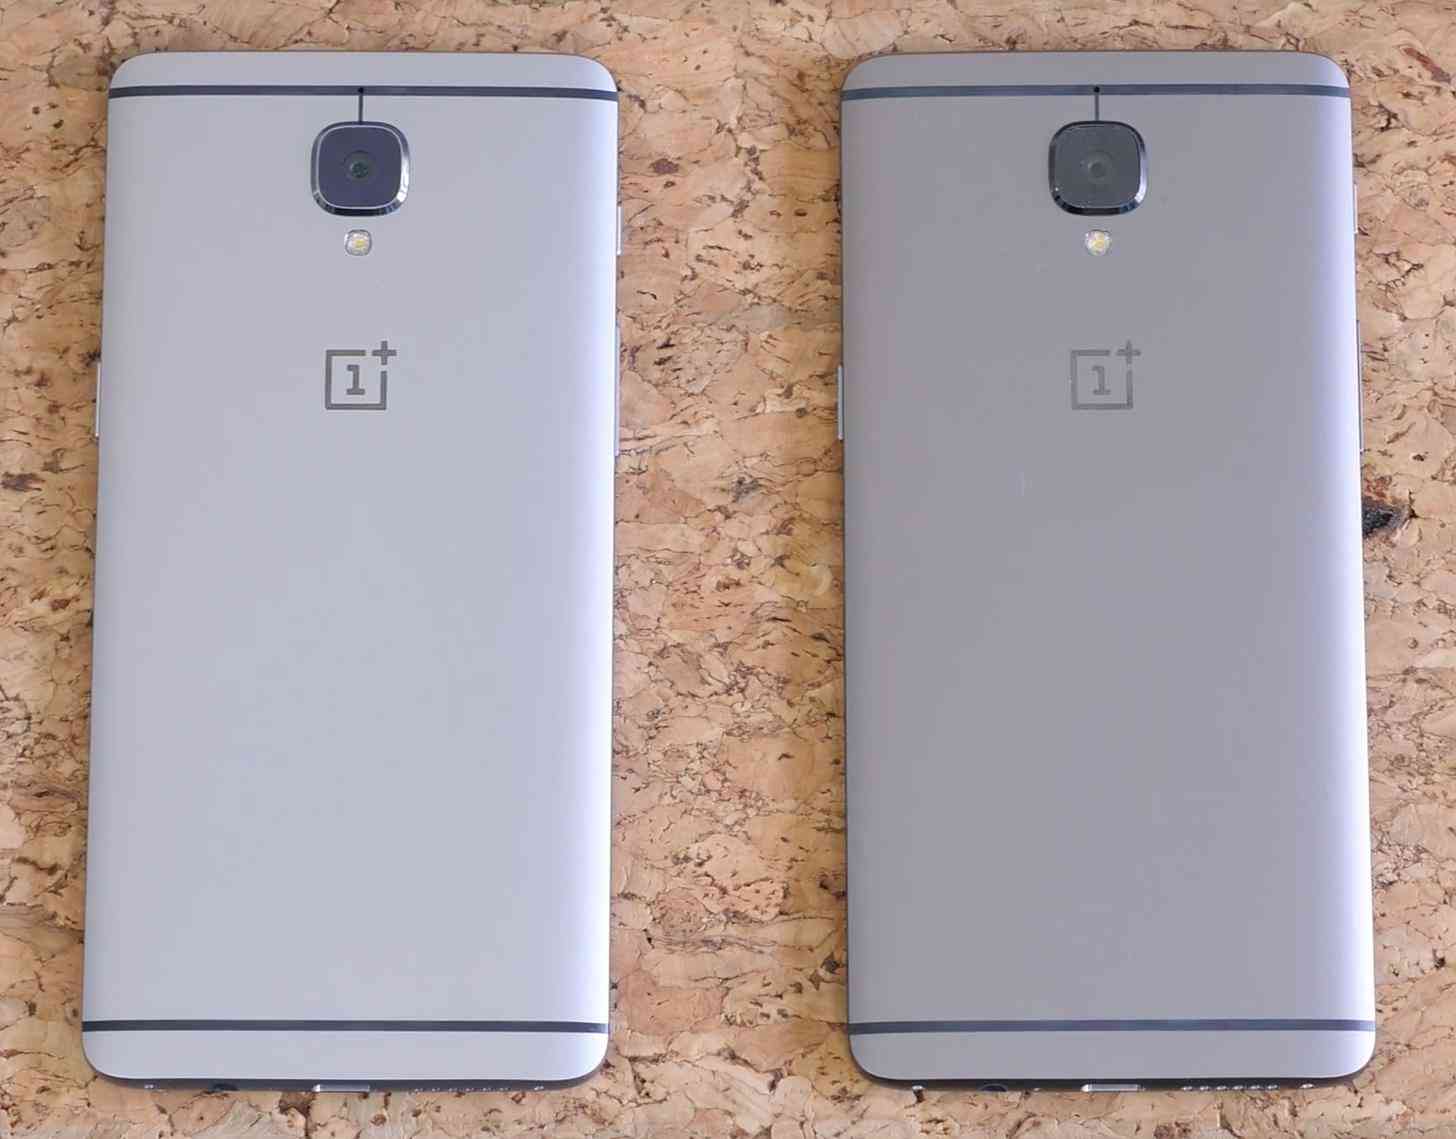 OnePlus 3T, OnePlus 3 hands-on comparison